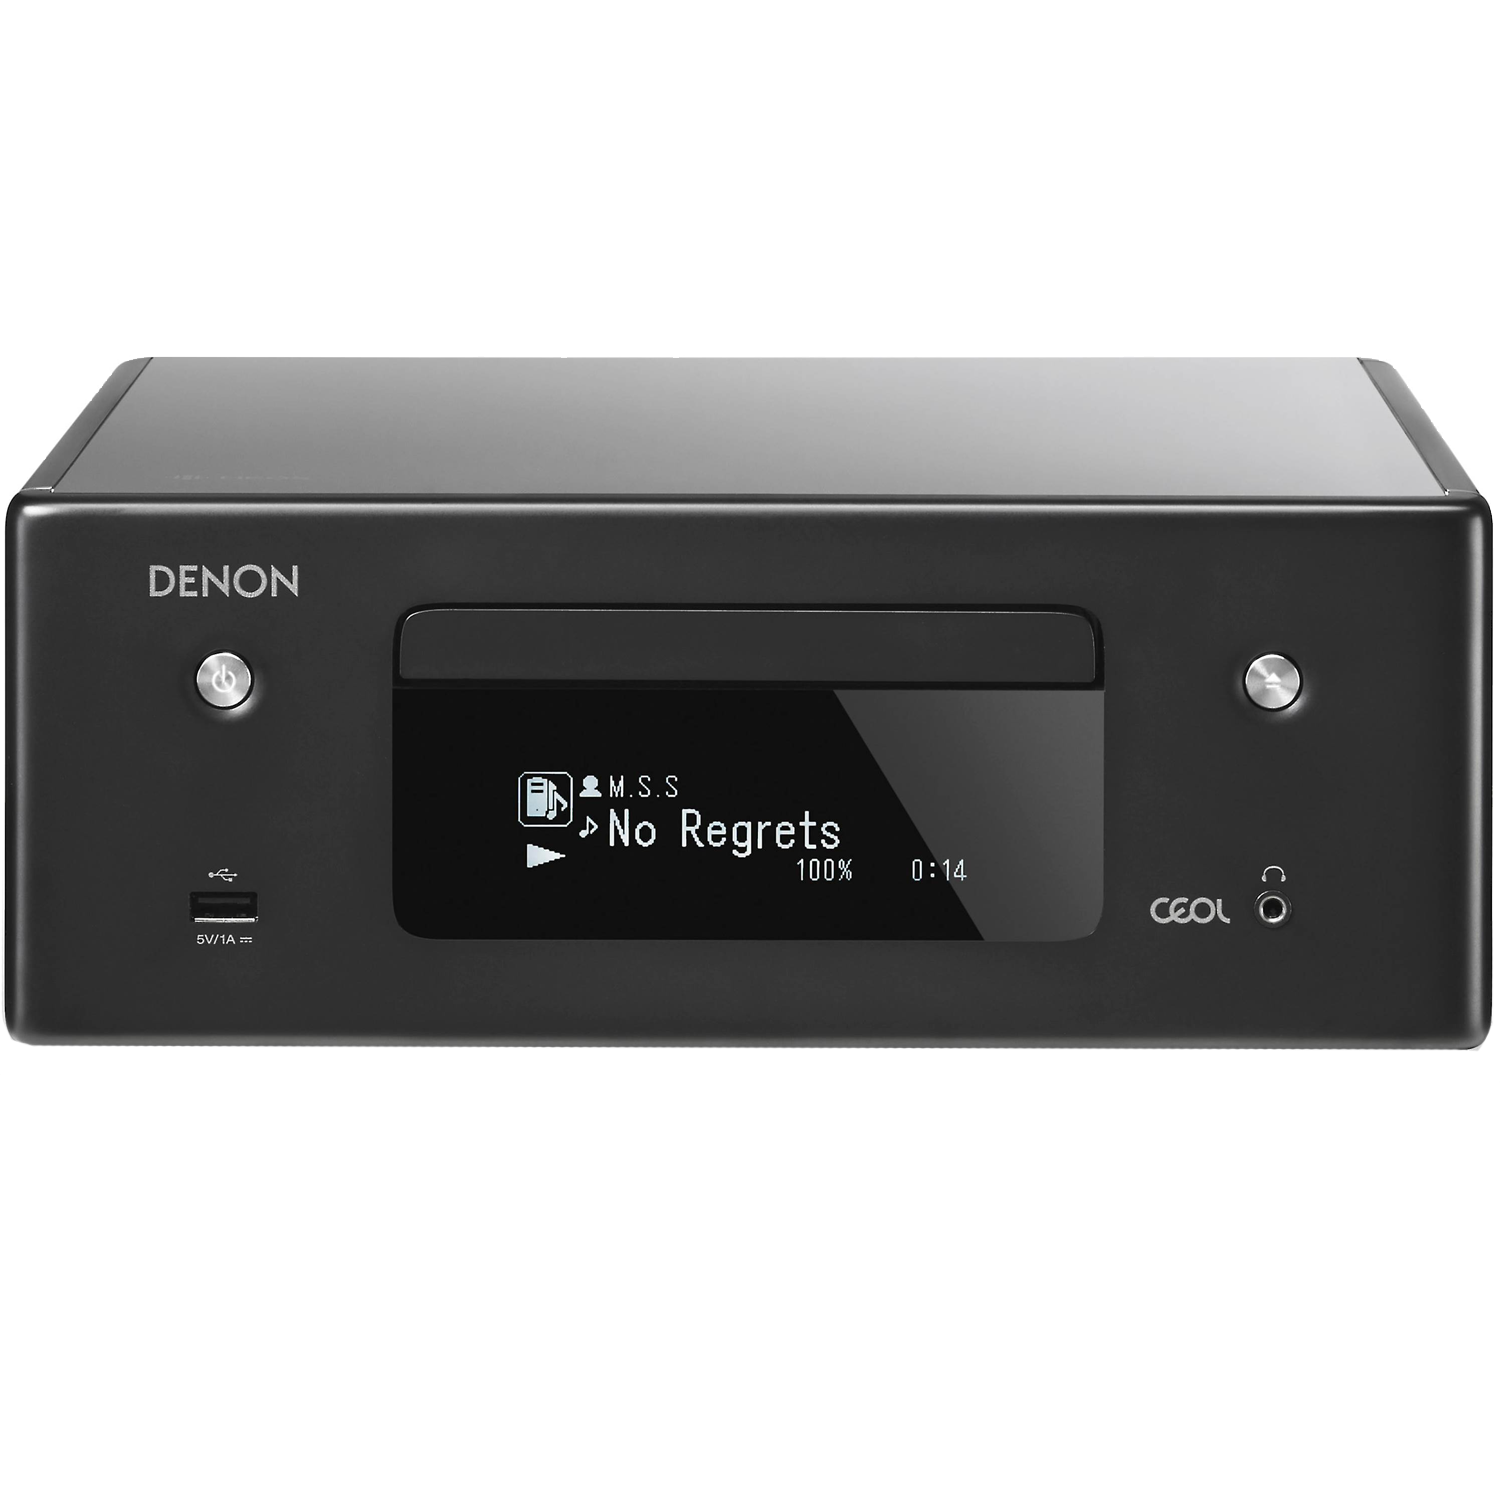 DENON CEOL RCD-N10 Compact Stereo Receiver w/ CD, BT, AirPlay, and HEOS